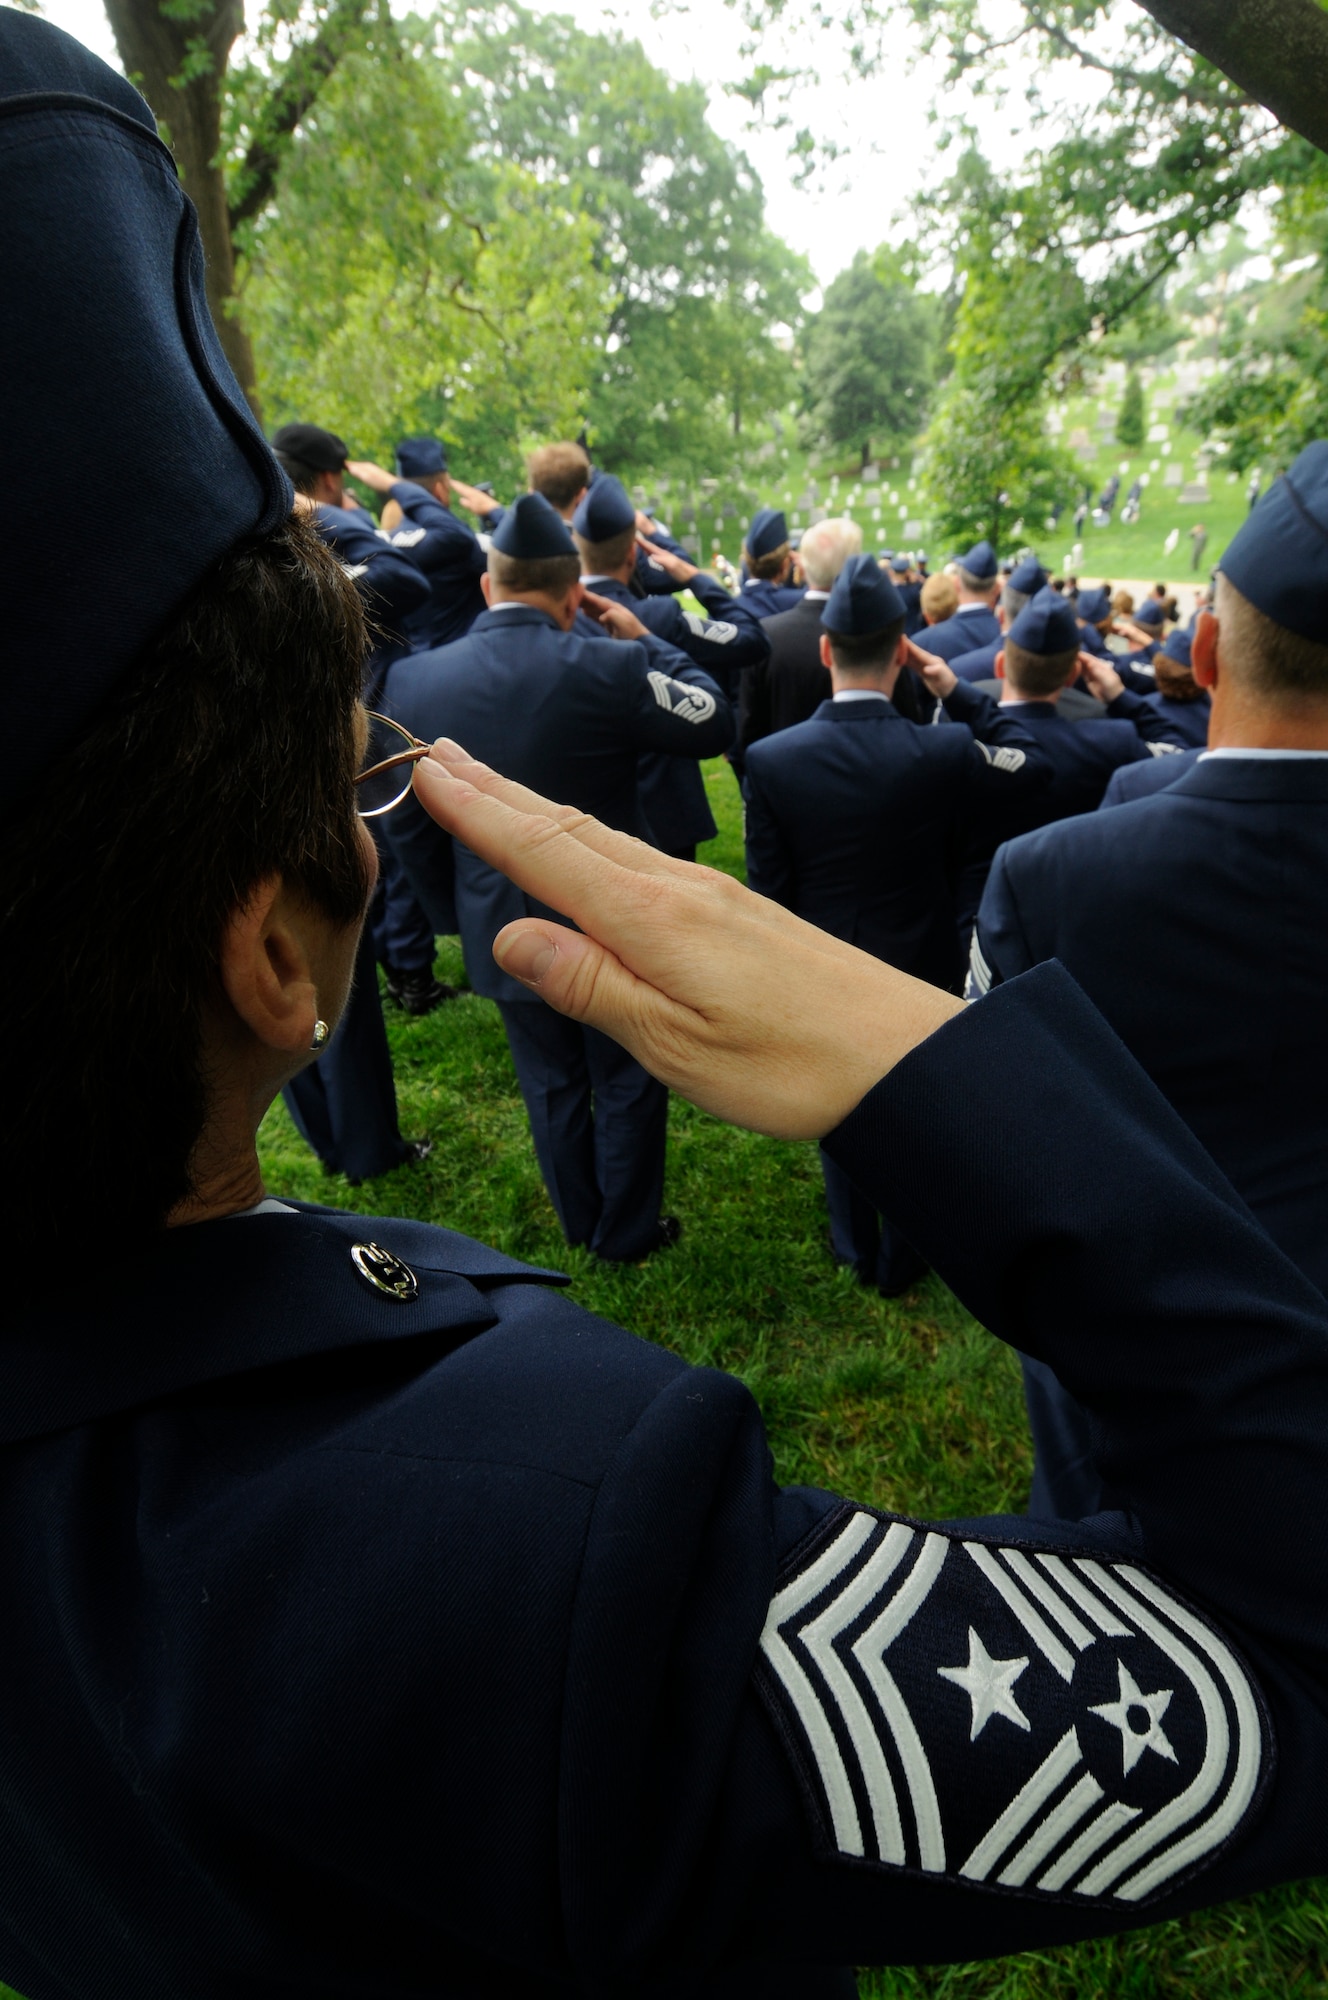 A command chief master sergeant salutes during the during funeral proceedings for former Chief Master Sgt. of the Air Force Paul W. Airey, May 28, at Arlington National Cemetery in Arlington, Va. Former CMSAF Airey was adviser to Secretary of the Air Force Harold Brown and Chief of Staff of the Air Force Gen. John P. McConnell on matters concerning welfare, effective utilization and progress of the enlisted members of the Air Force.  Former CMSAF Airey was the first chief master sergeant appointed to this ultimate noncommissioned officer position and was selected from among 21 major air command nominees to become the first chief master sergeant of the Air Force. (U.S. Air Force photo by Staff Sgt. Dan DeCook)